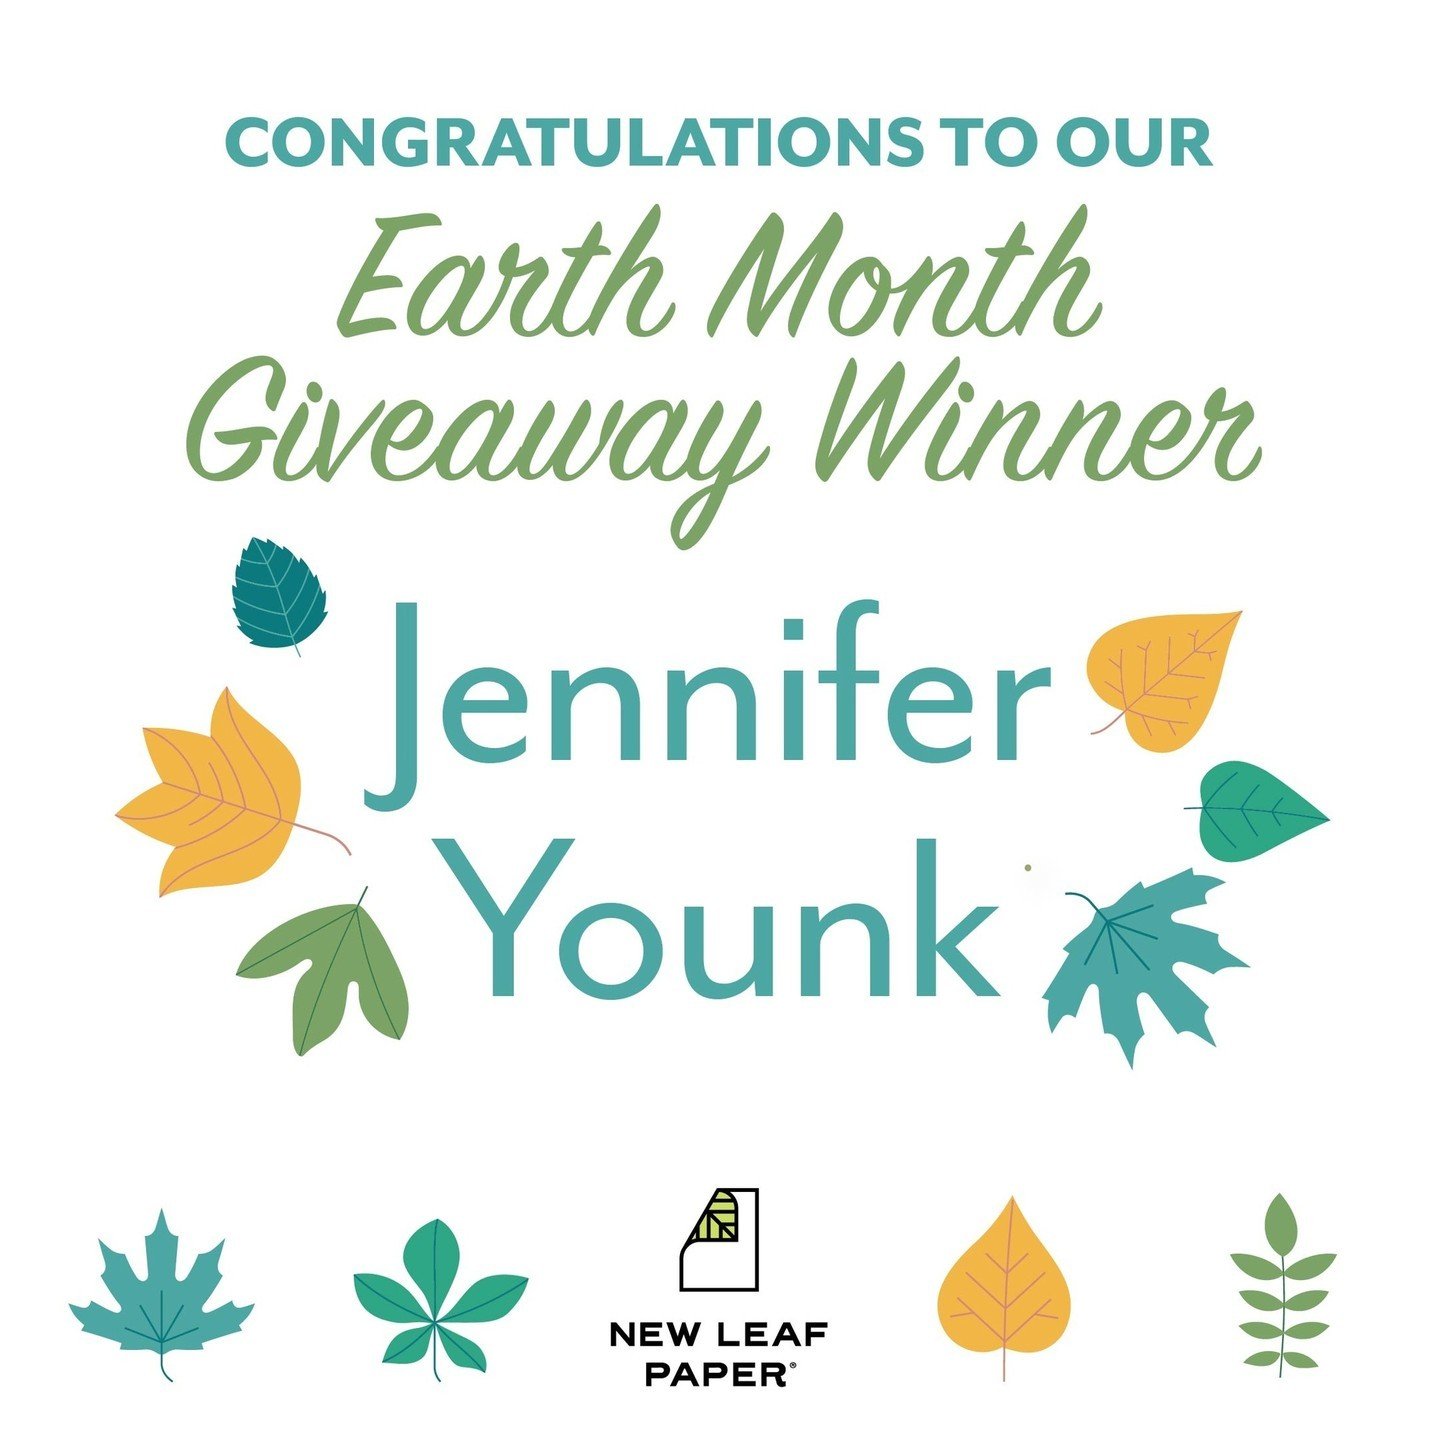 Congratulations to our Earth Month Giveaway winner, Jennifer Younk! DM us with your mailing address and we'll get your prize package to you asap!⁠
⁠
Thank you for all who entered. ⁠
⁠
#newleafpaper #BCorp #win #giveawayalert #giveawaytime #entertowin